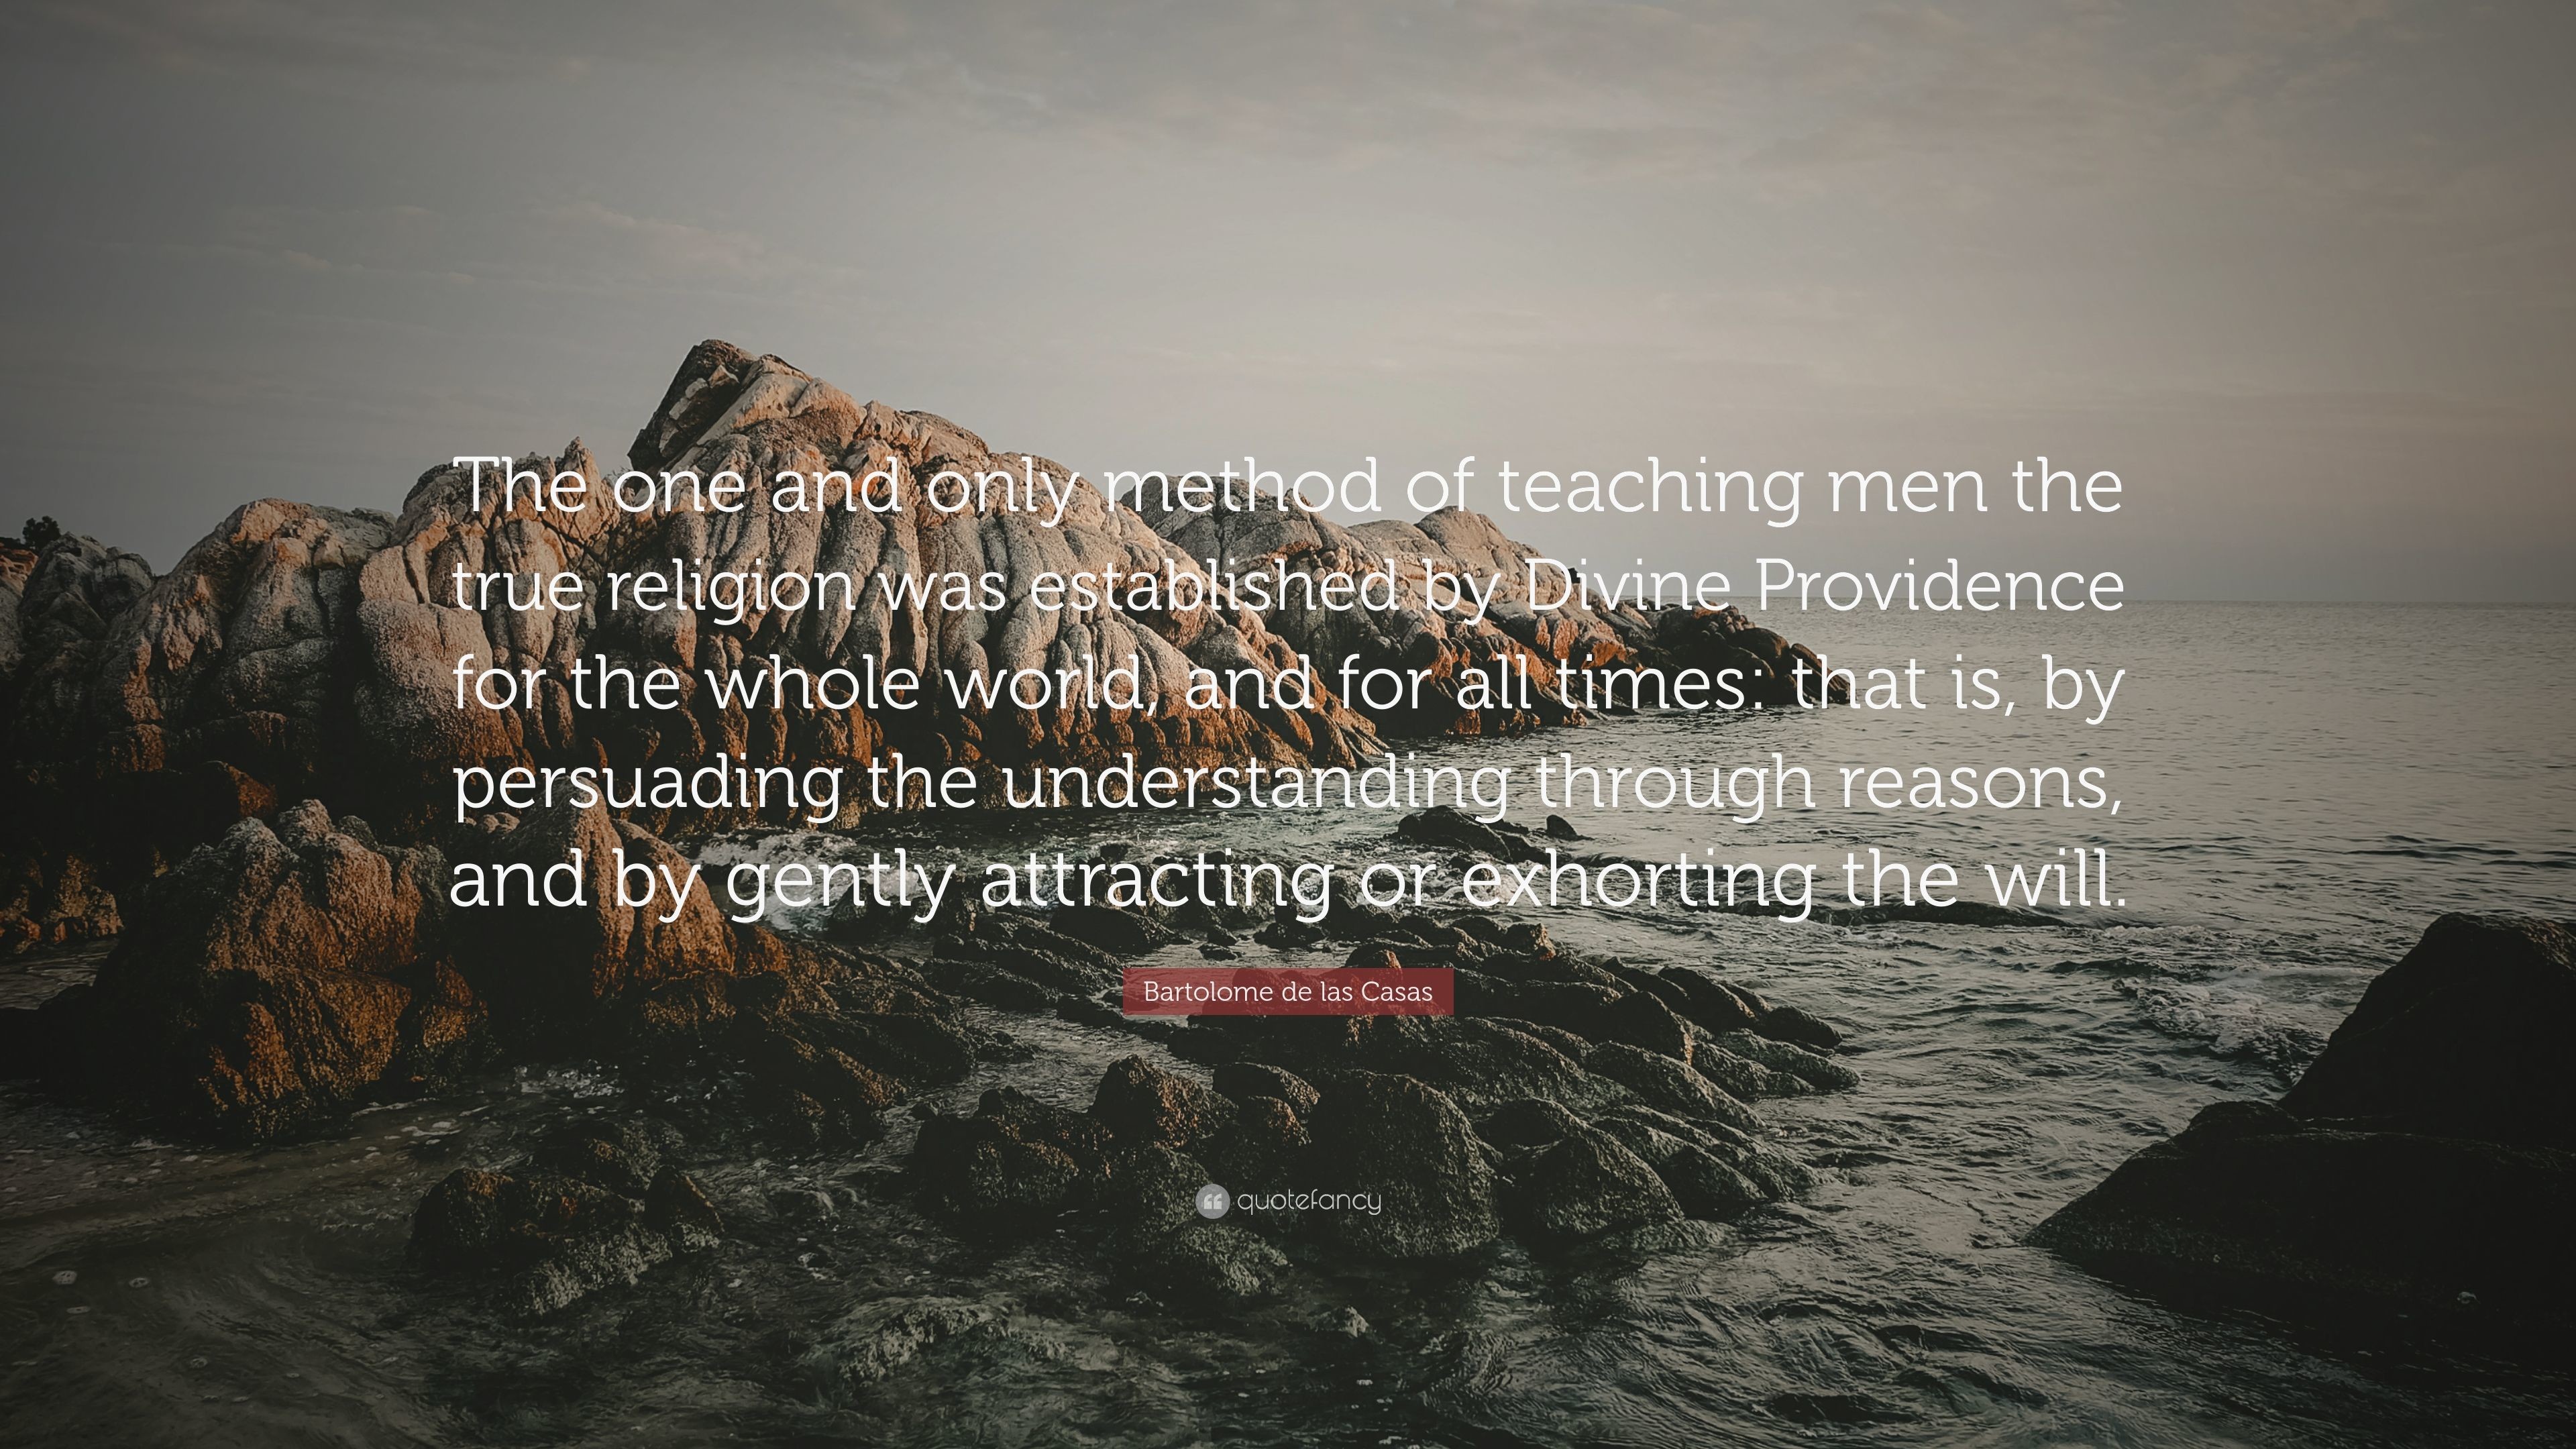 3840x2160 Bartolome de las Casas Quote: “The one and only method of teaching men the